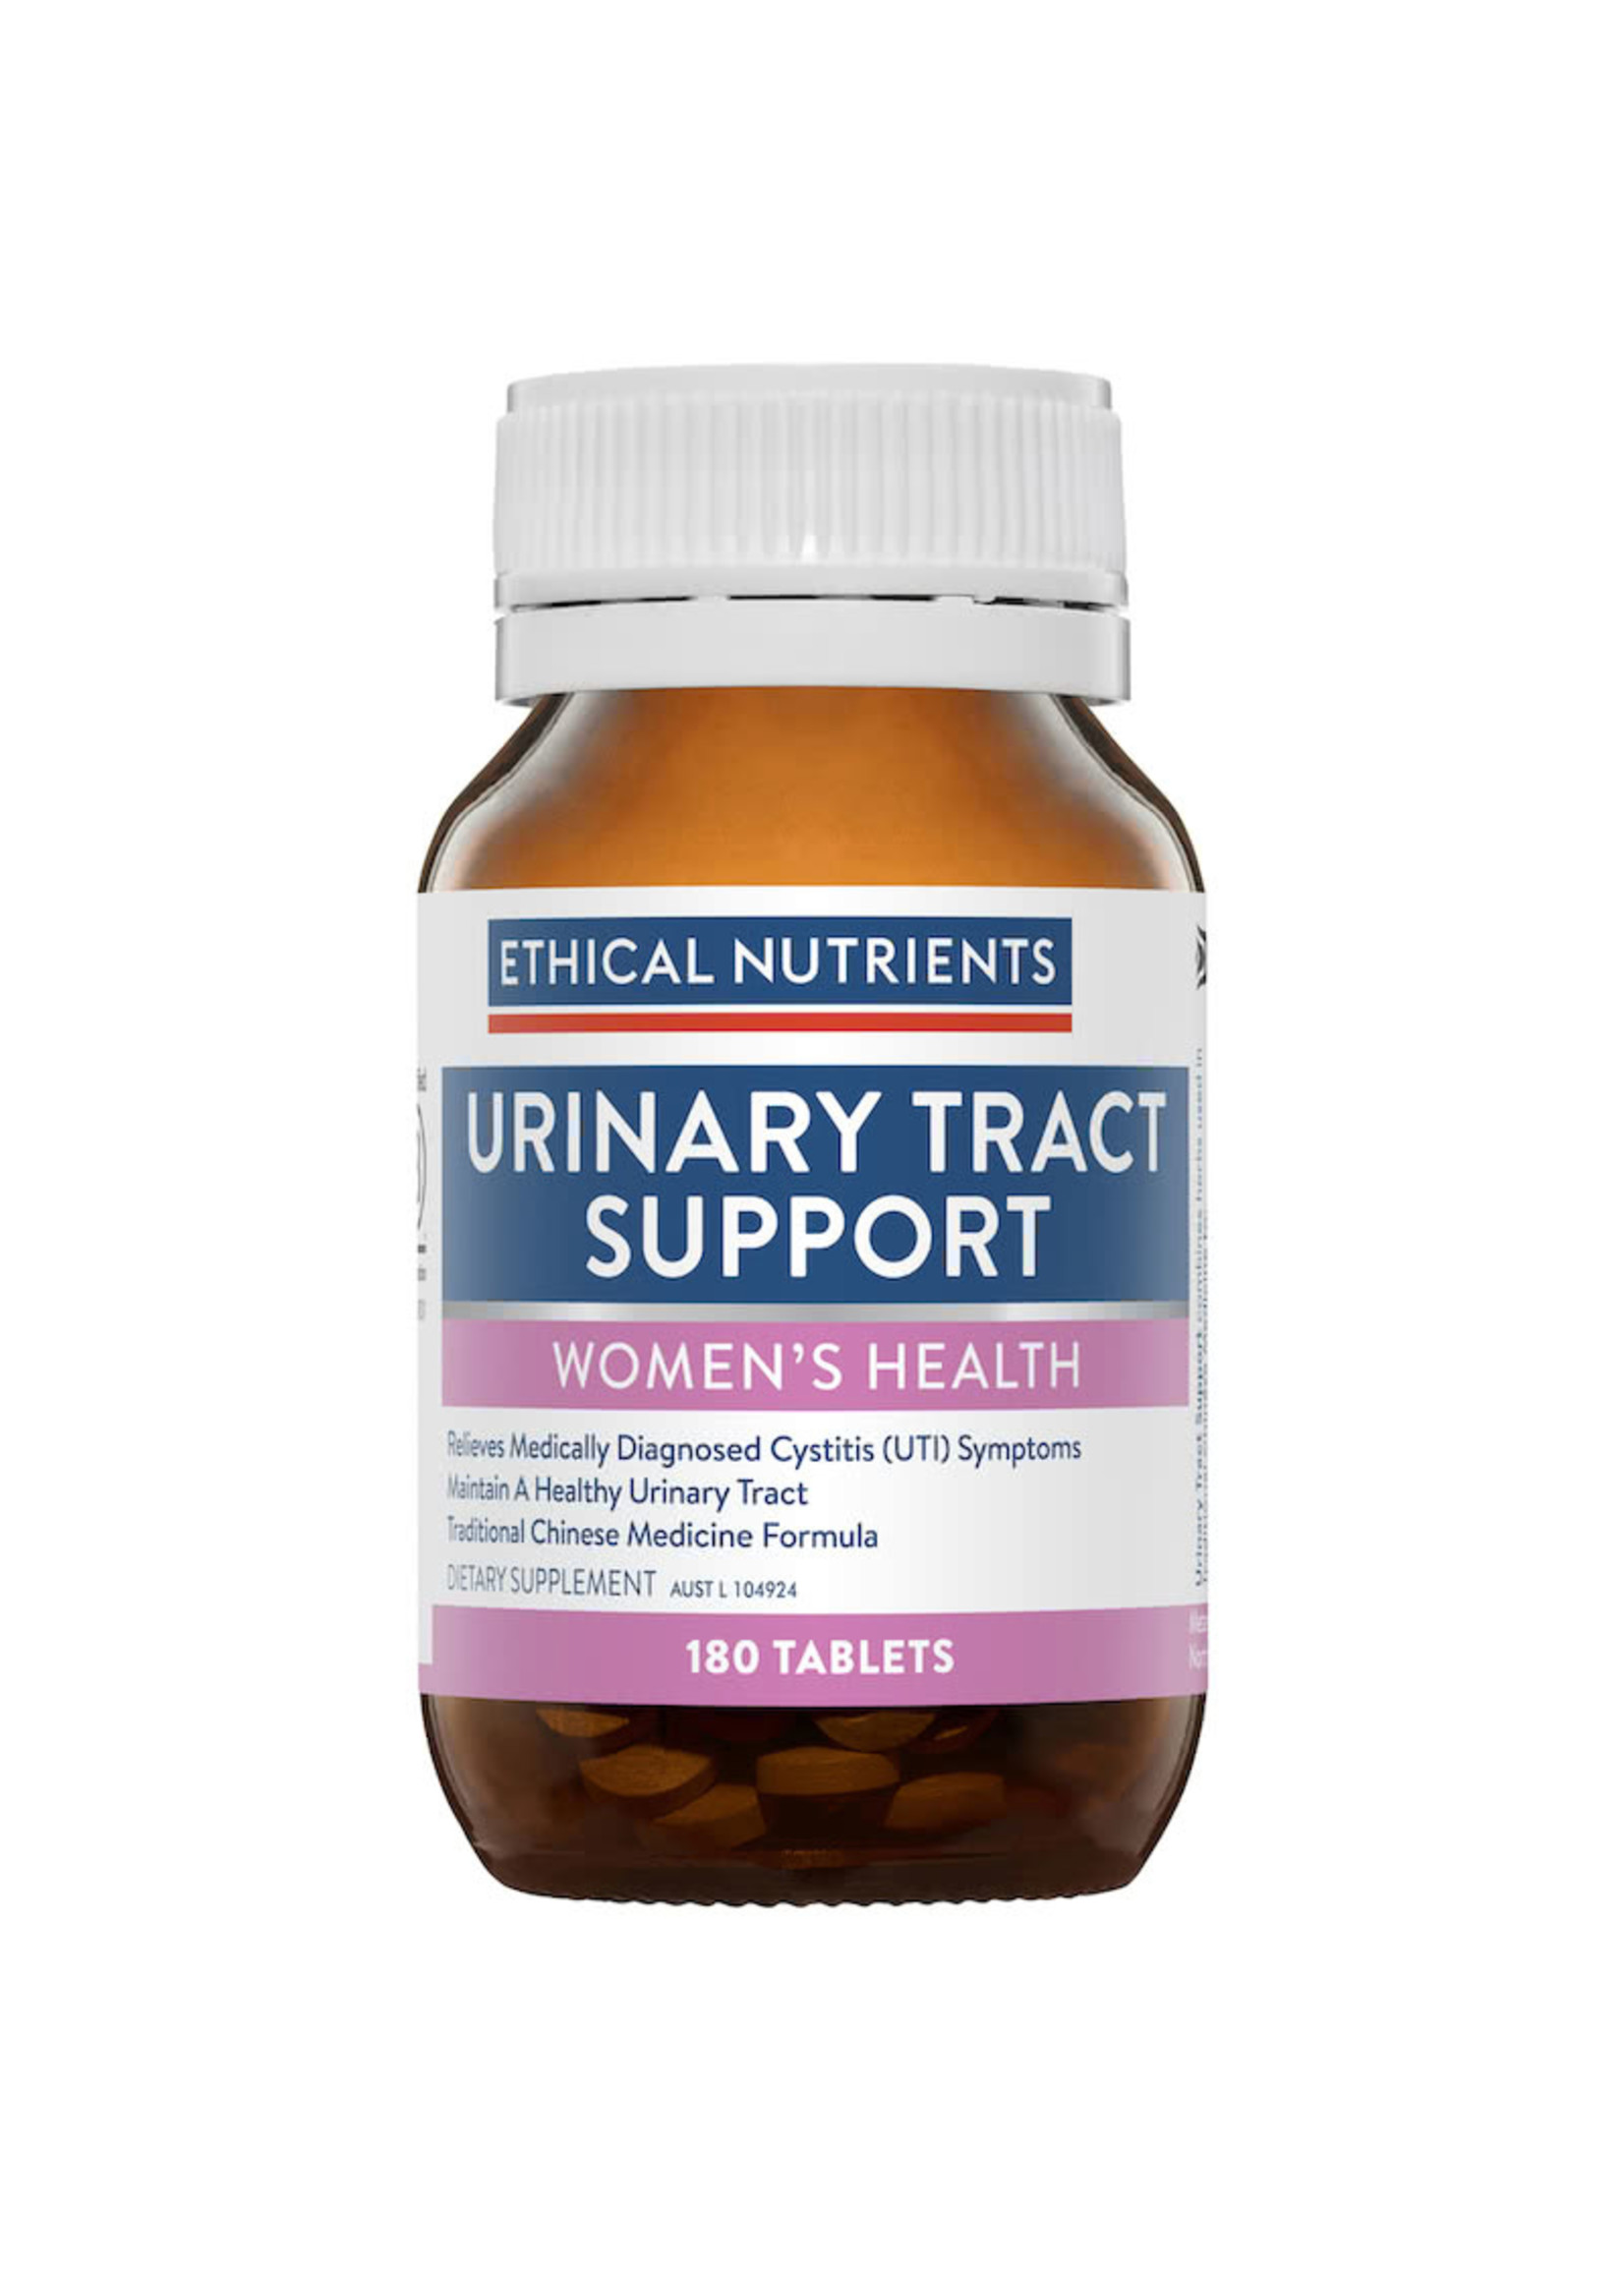 ETHICAL NUTRIENTS Ethical Nutrients Urinary Tract Support 180 tabs